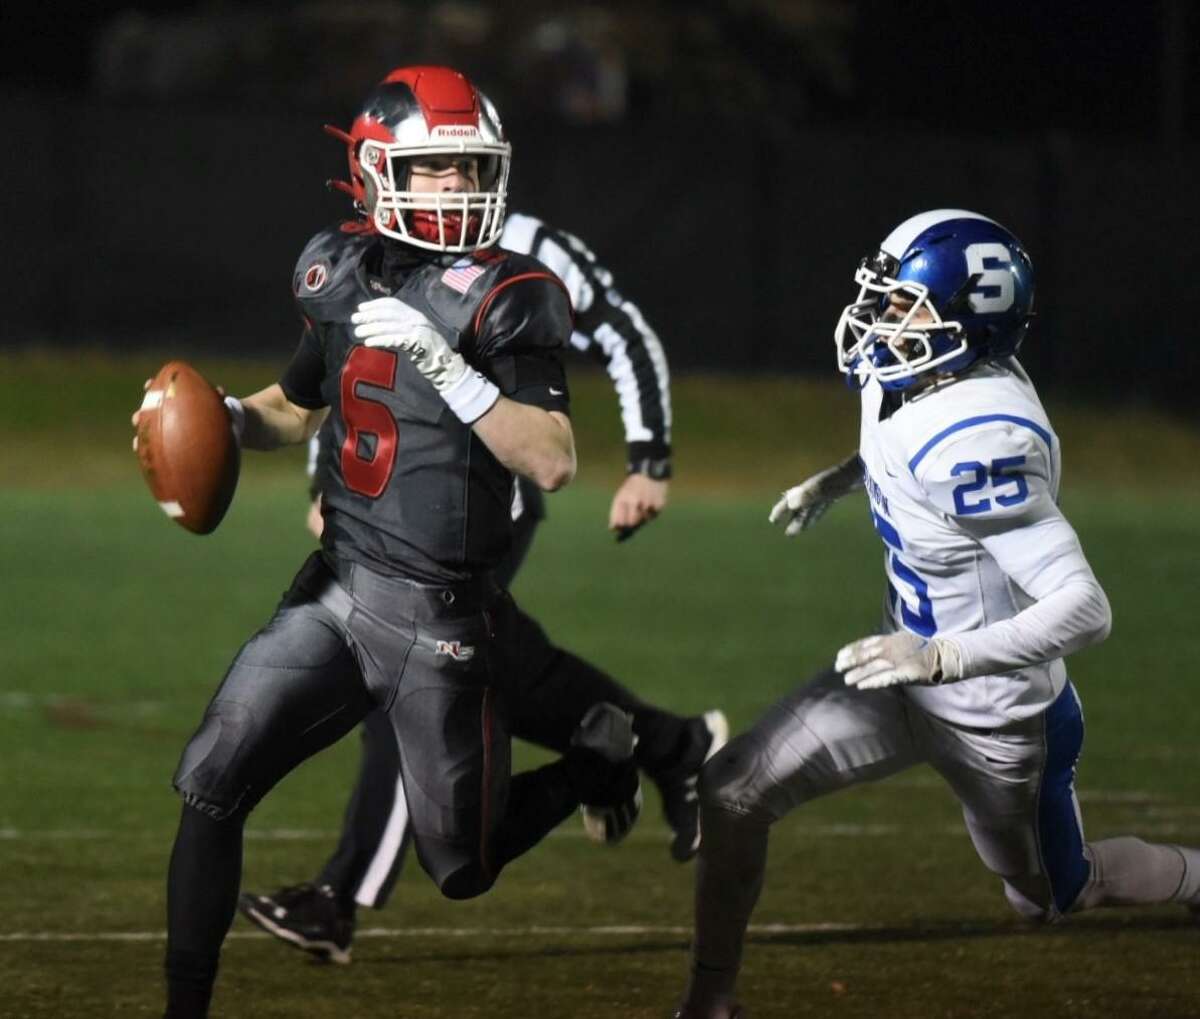 New Canaan quarterback Henry Cunney (6) is pursued by Southington’s Jared Guida (25) during a CIAC football quarterfinal on Tuesday, November 30, 2021 at Dunning Field in New Canaan, Conn.